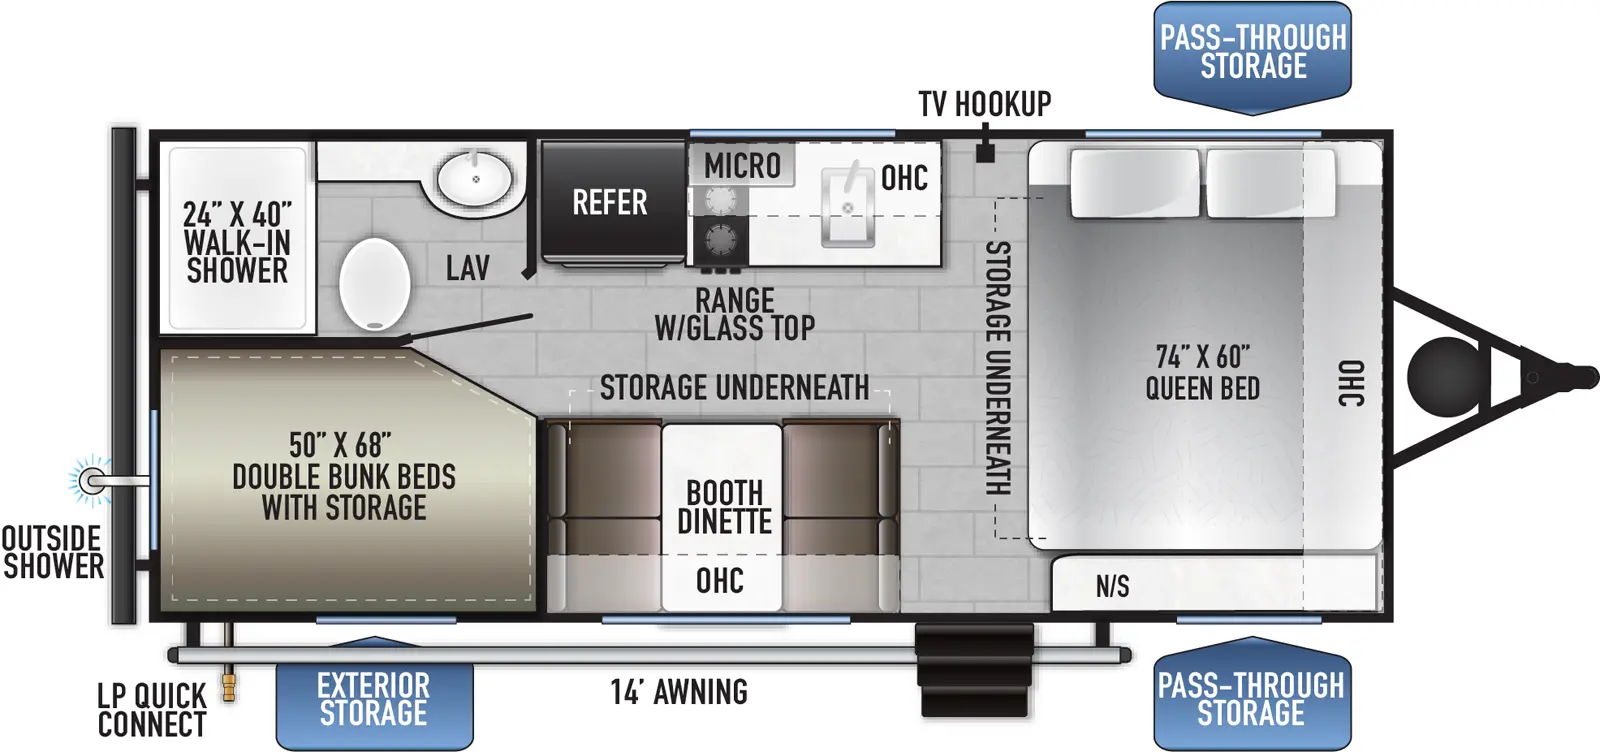 The 170BHSLE has no slide outs and 1 entry door. Exterior features a rear outside shower, LP quick connect, 14 foot awning and front pass-through storage. Interior layout front to back includes: side-facing queen bed with door side nightstand, overhead cabinet, storage underneath and off-door side TV hookup; door-side entry, booth dinette with overhead cabinet and storage underneath; off-door side kitchen counter with sink, range with glass top, overhead cabinet, microwave, and refrigerator; rear door side double bunk beds with storage; rear off-door side full bathroom with walk-in shower.